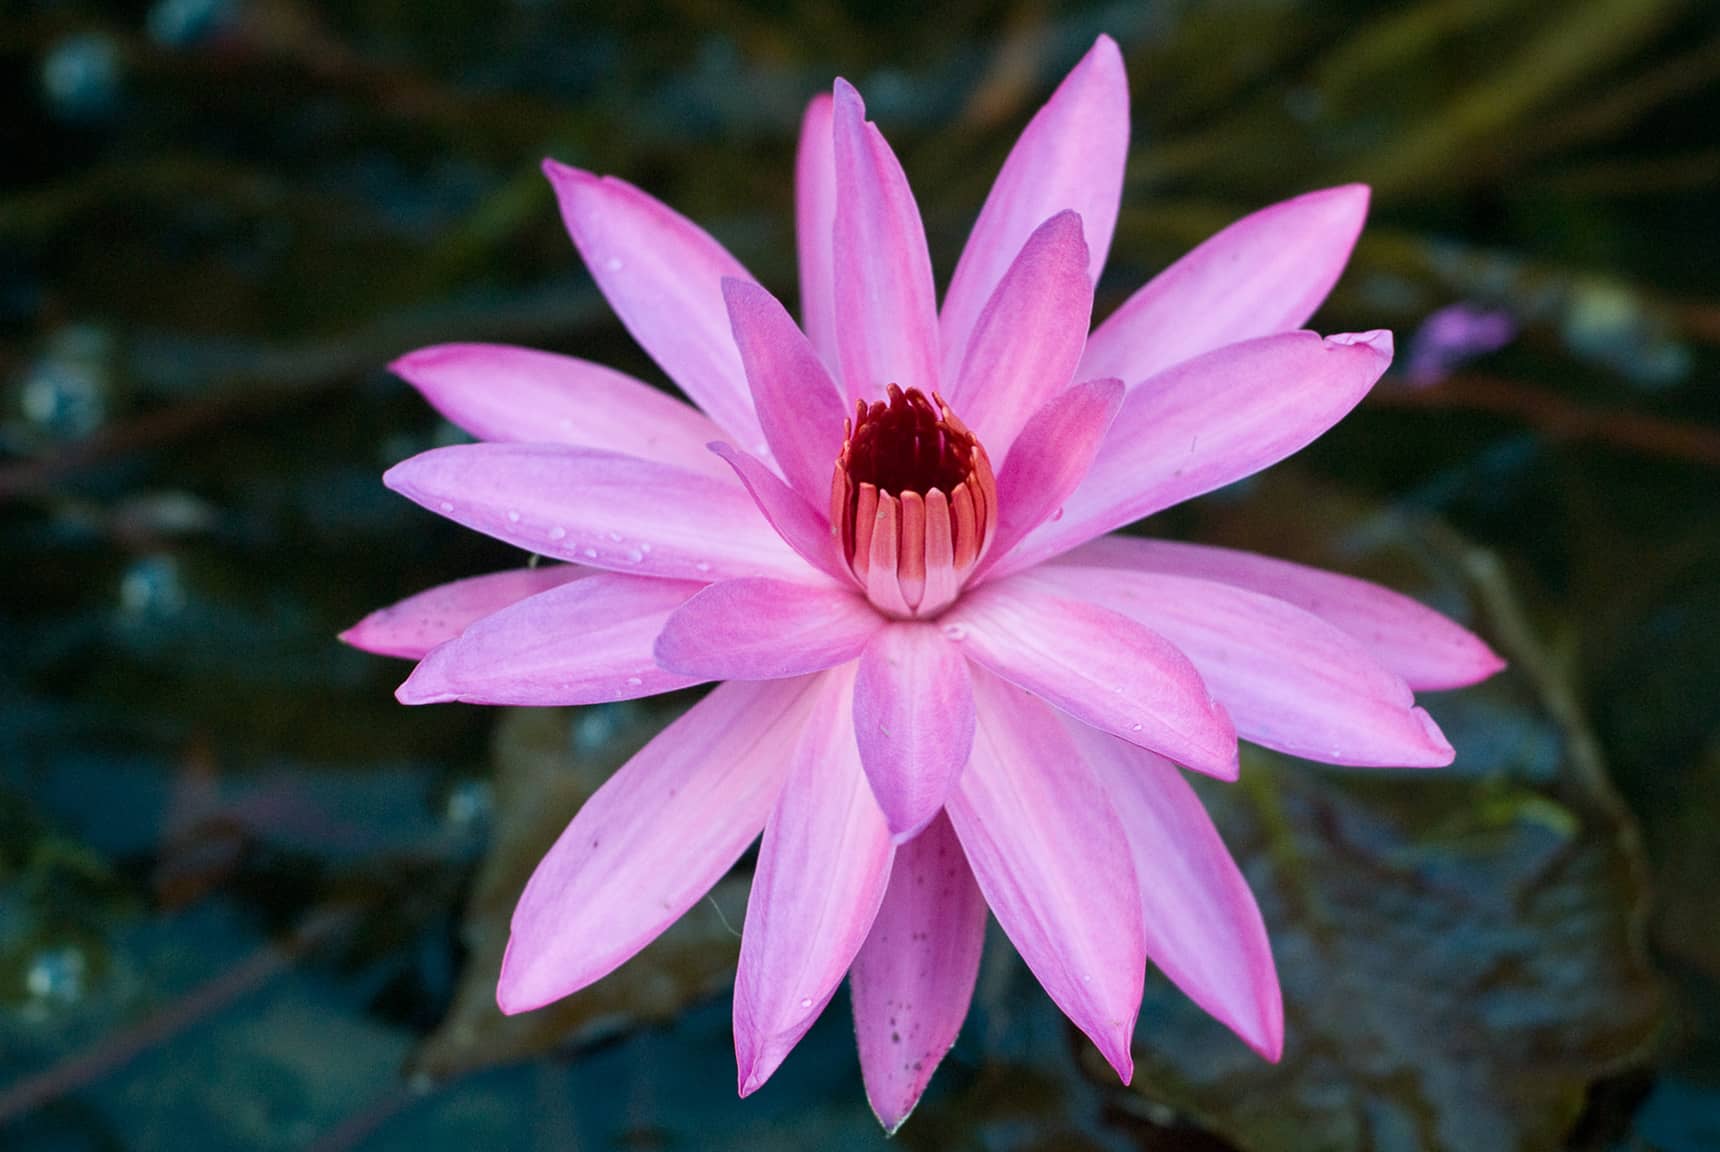 Professional photos of tropical flowers in Bali Indonesia